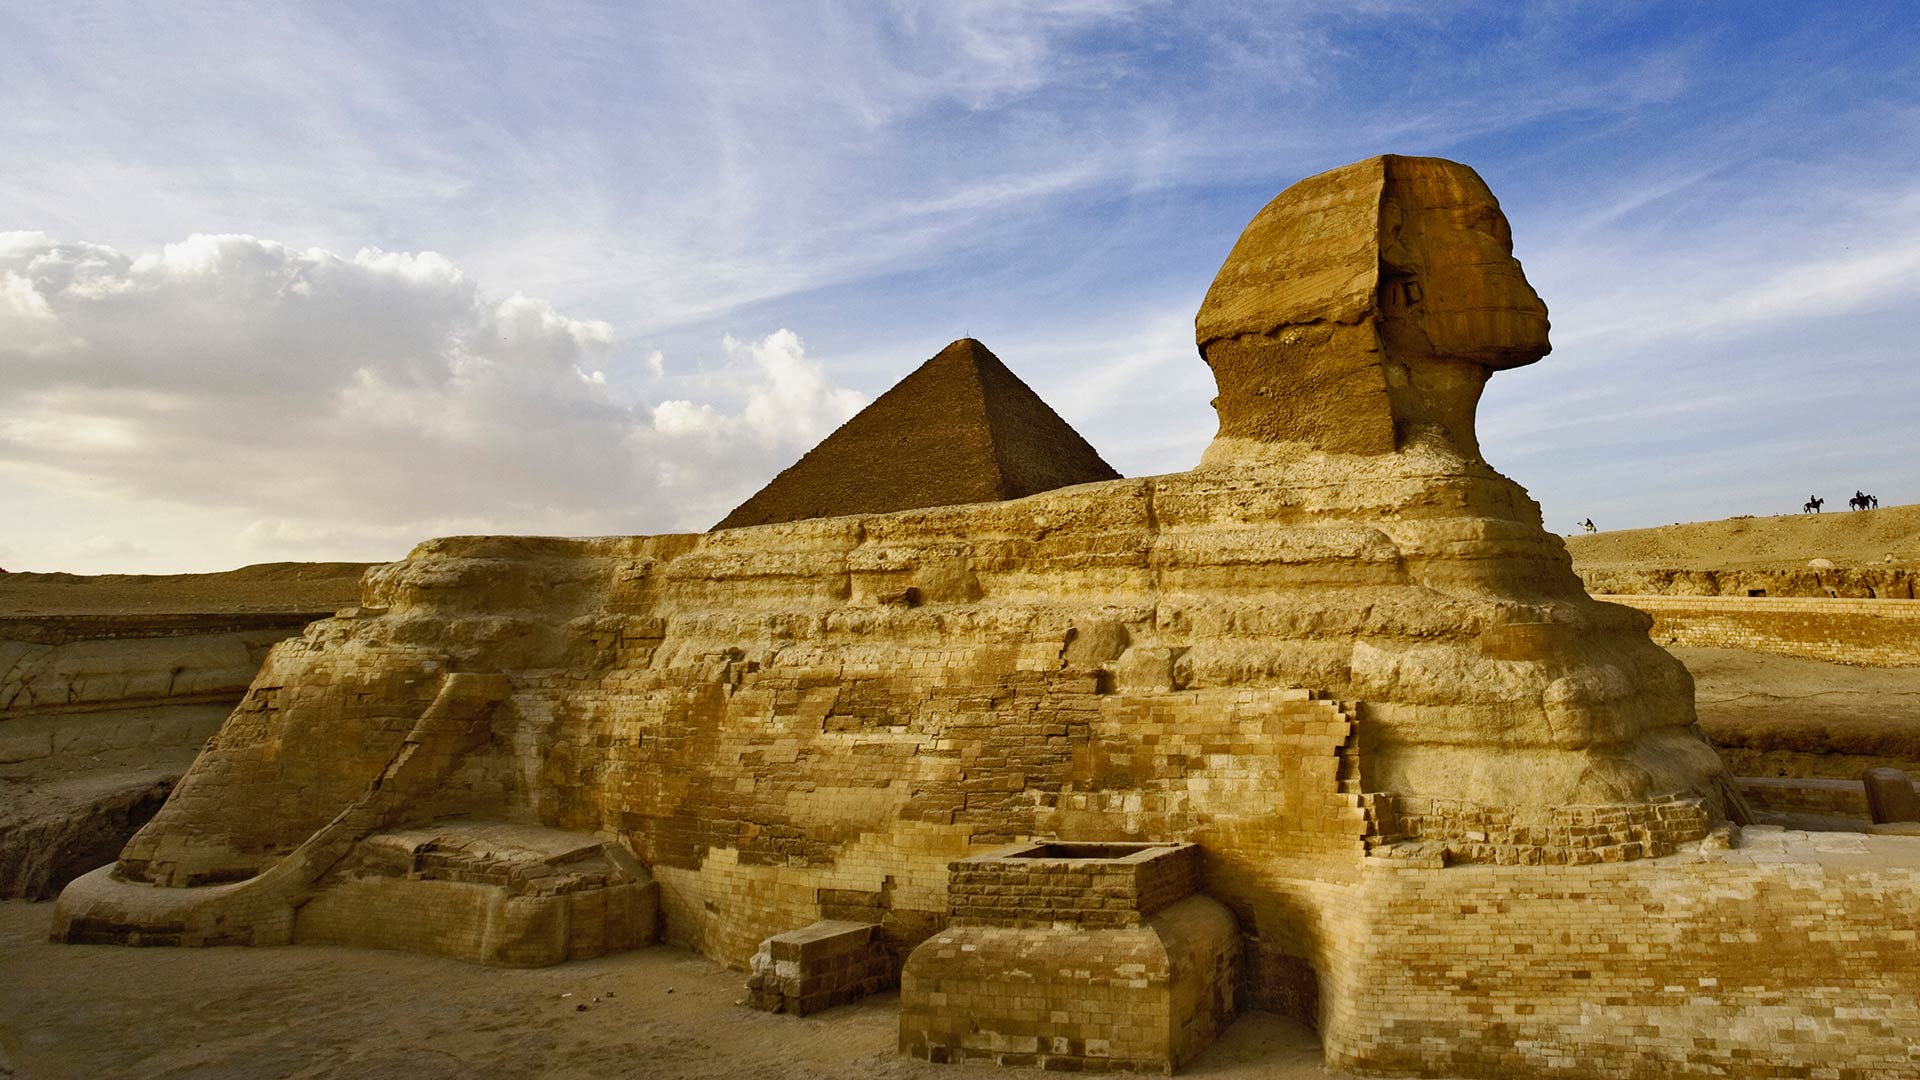 The Great Sphinx of Giza near modern day Cairo, Egypt